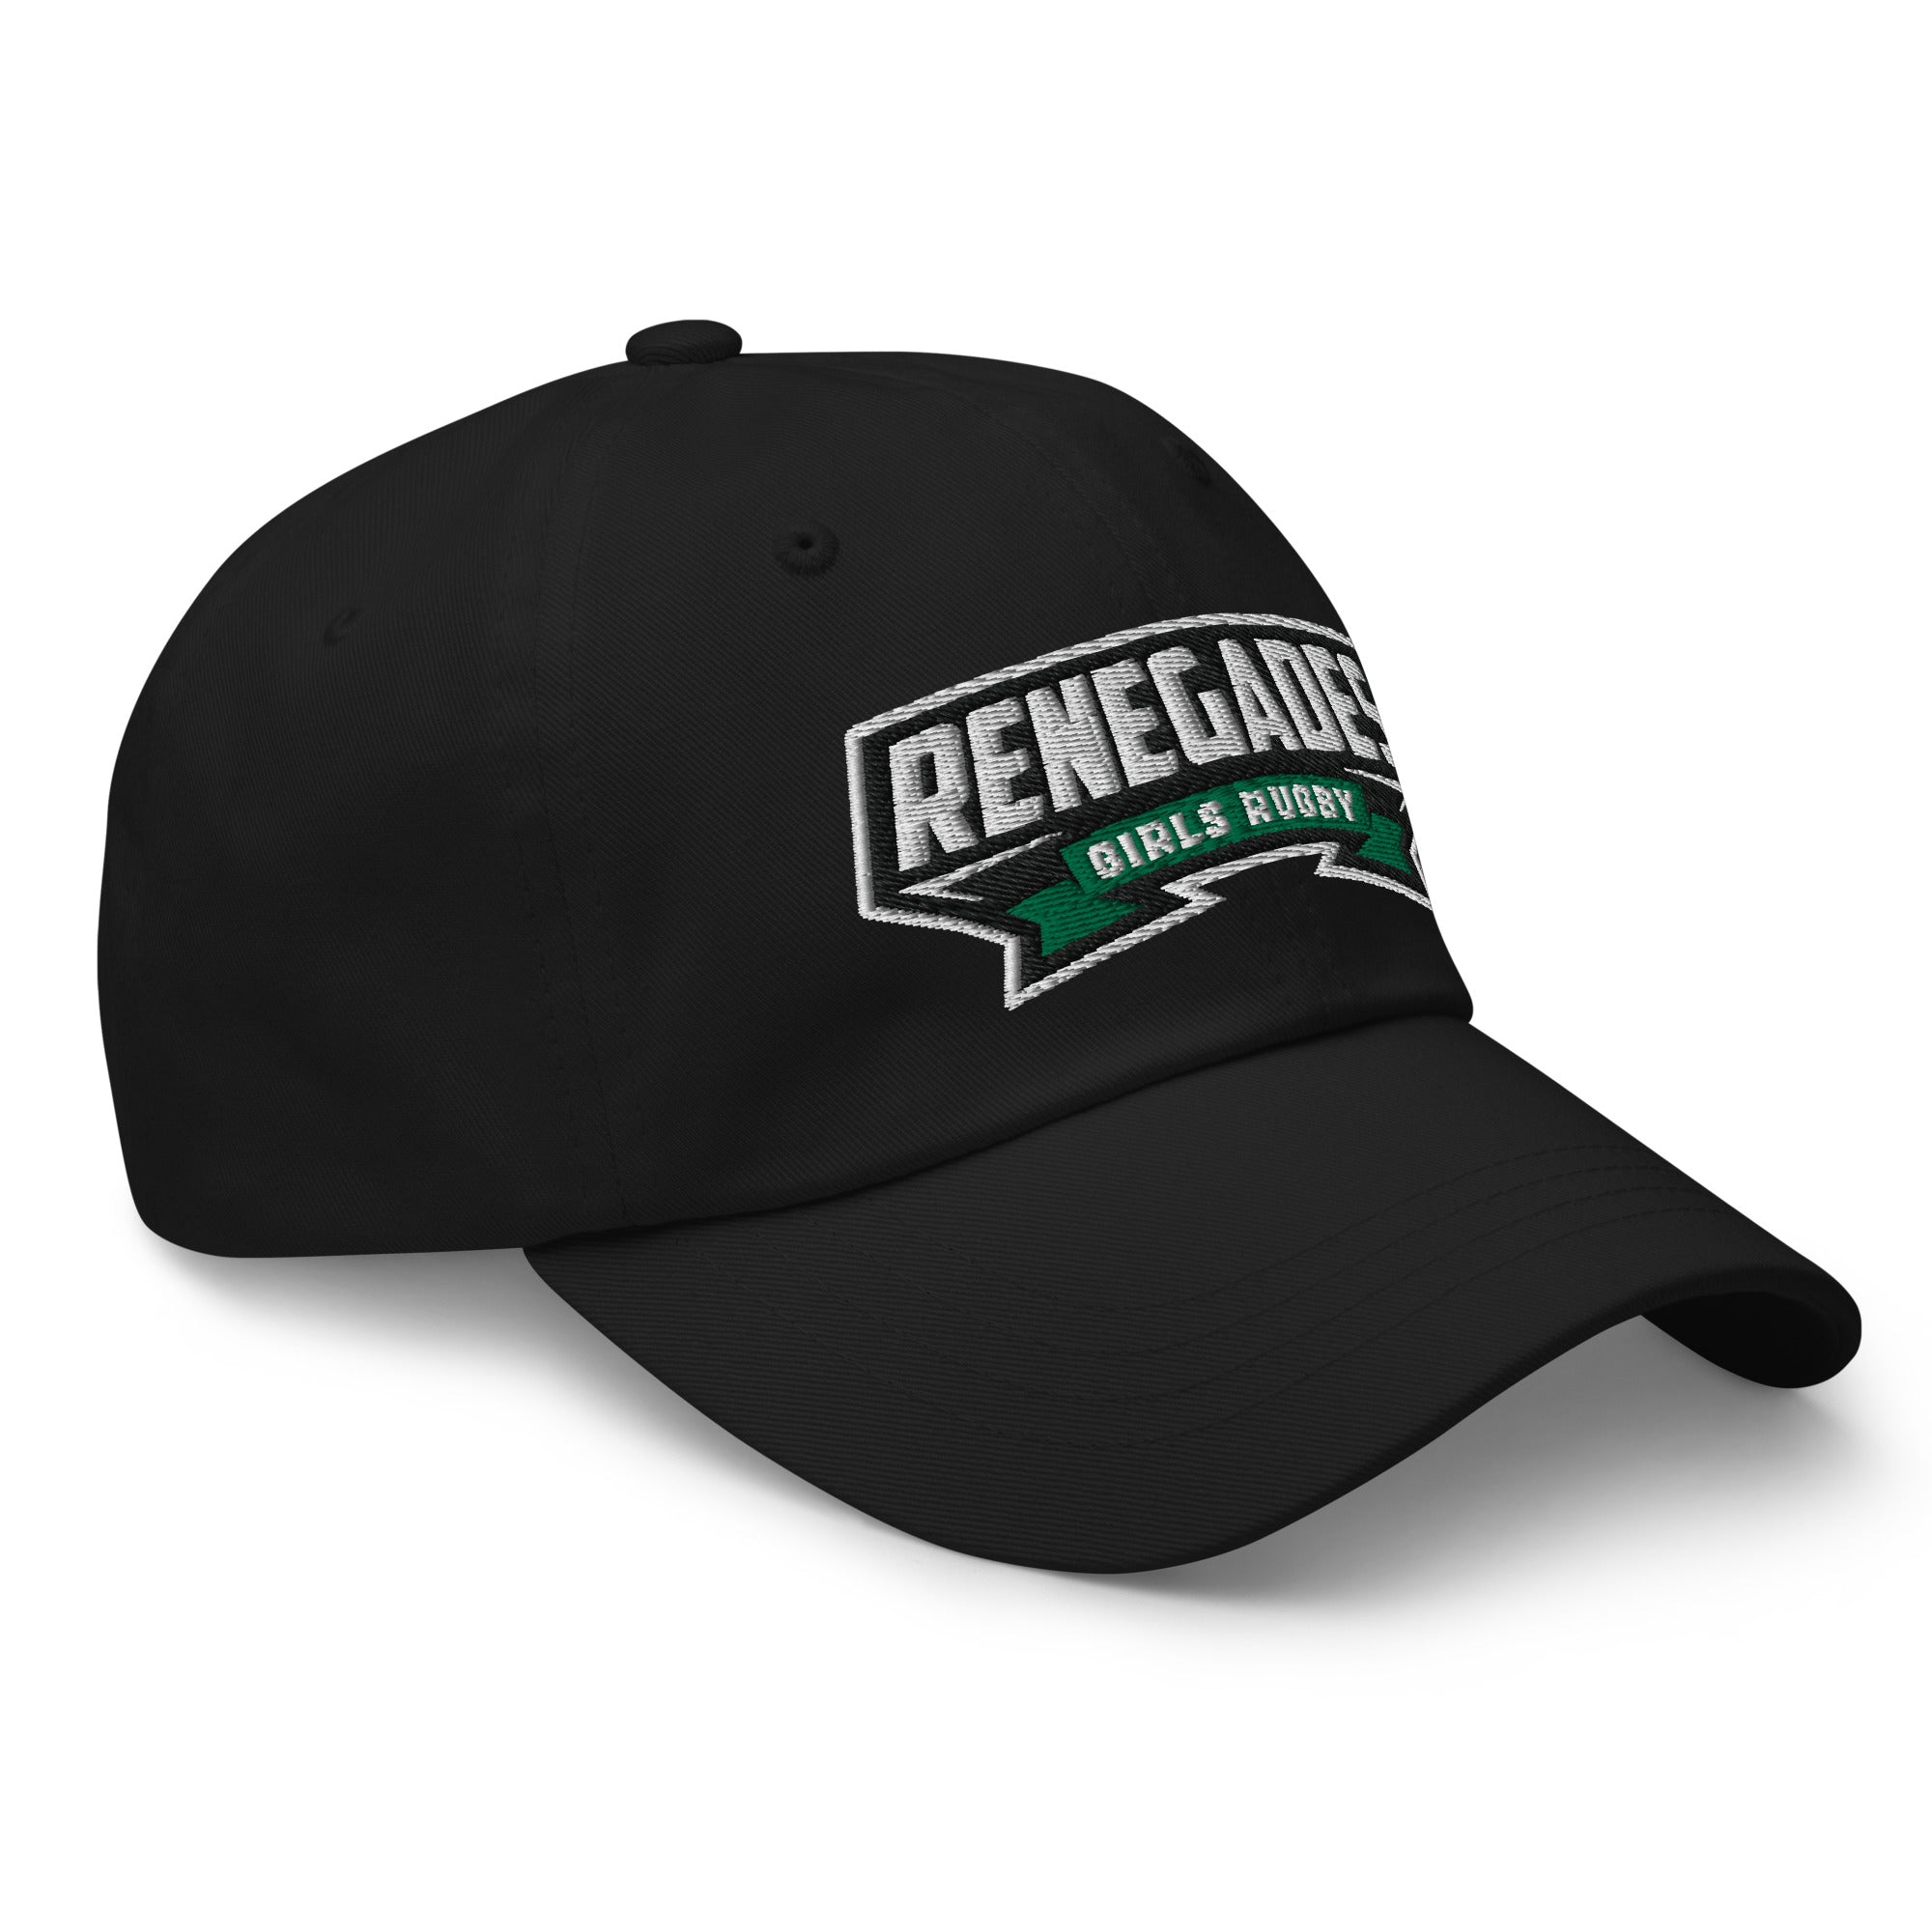 Rugby Imports Renegades Adjustable Hat